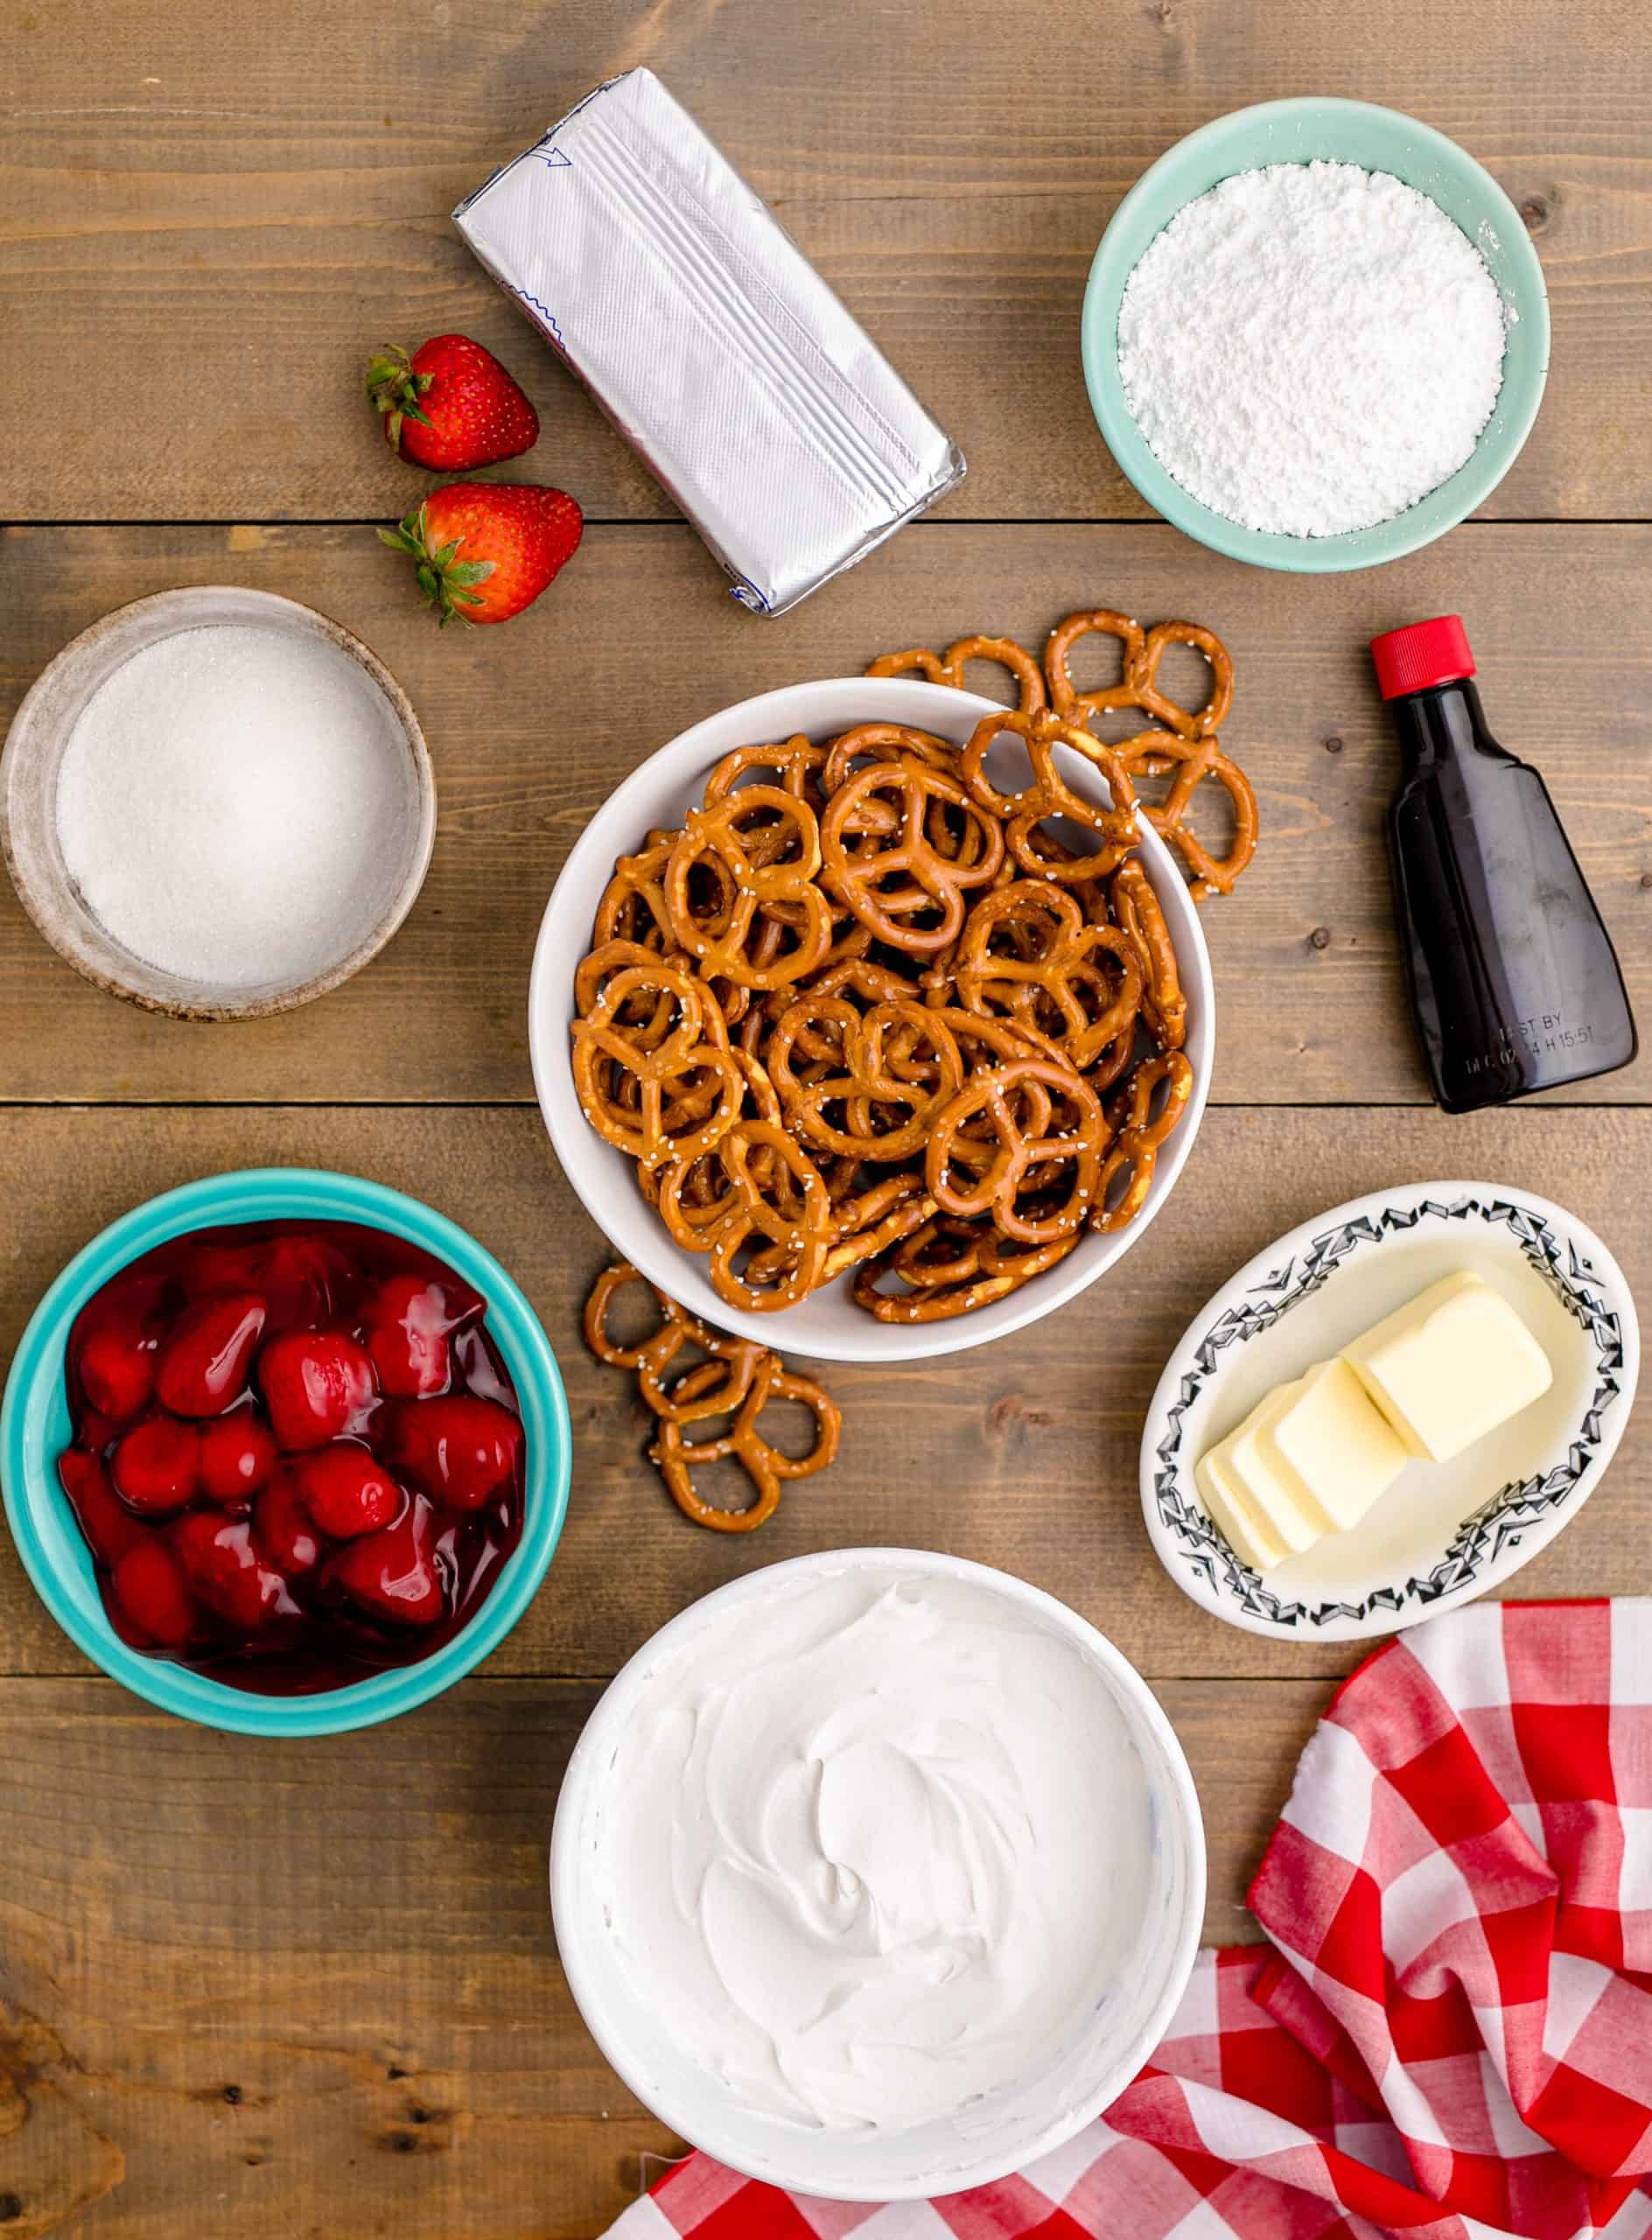 Ingredients needed: pretzels, sugar, salted butter, cream cheese, powdered sugar, almond extract, whipped topping and strawberry pie filling.